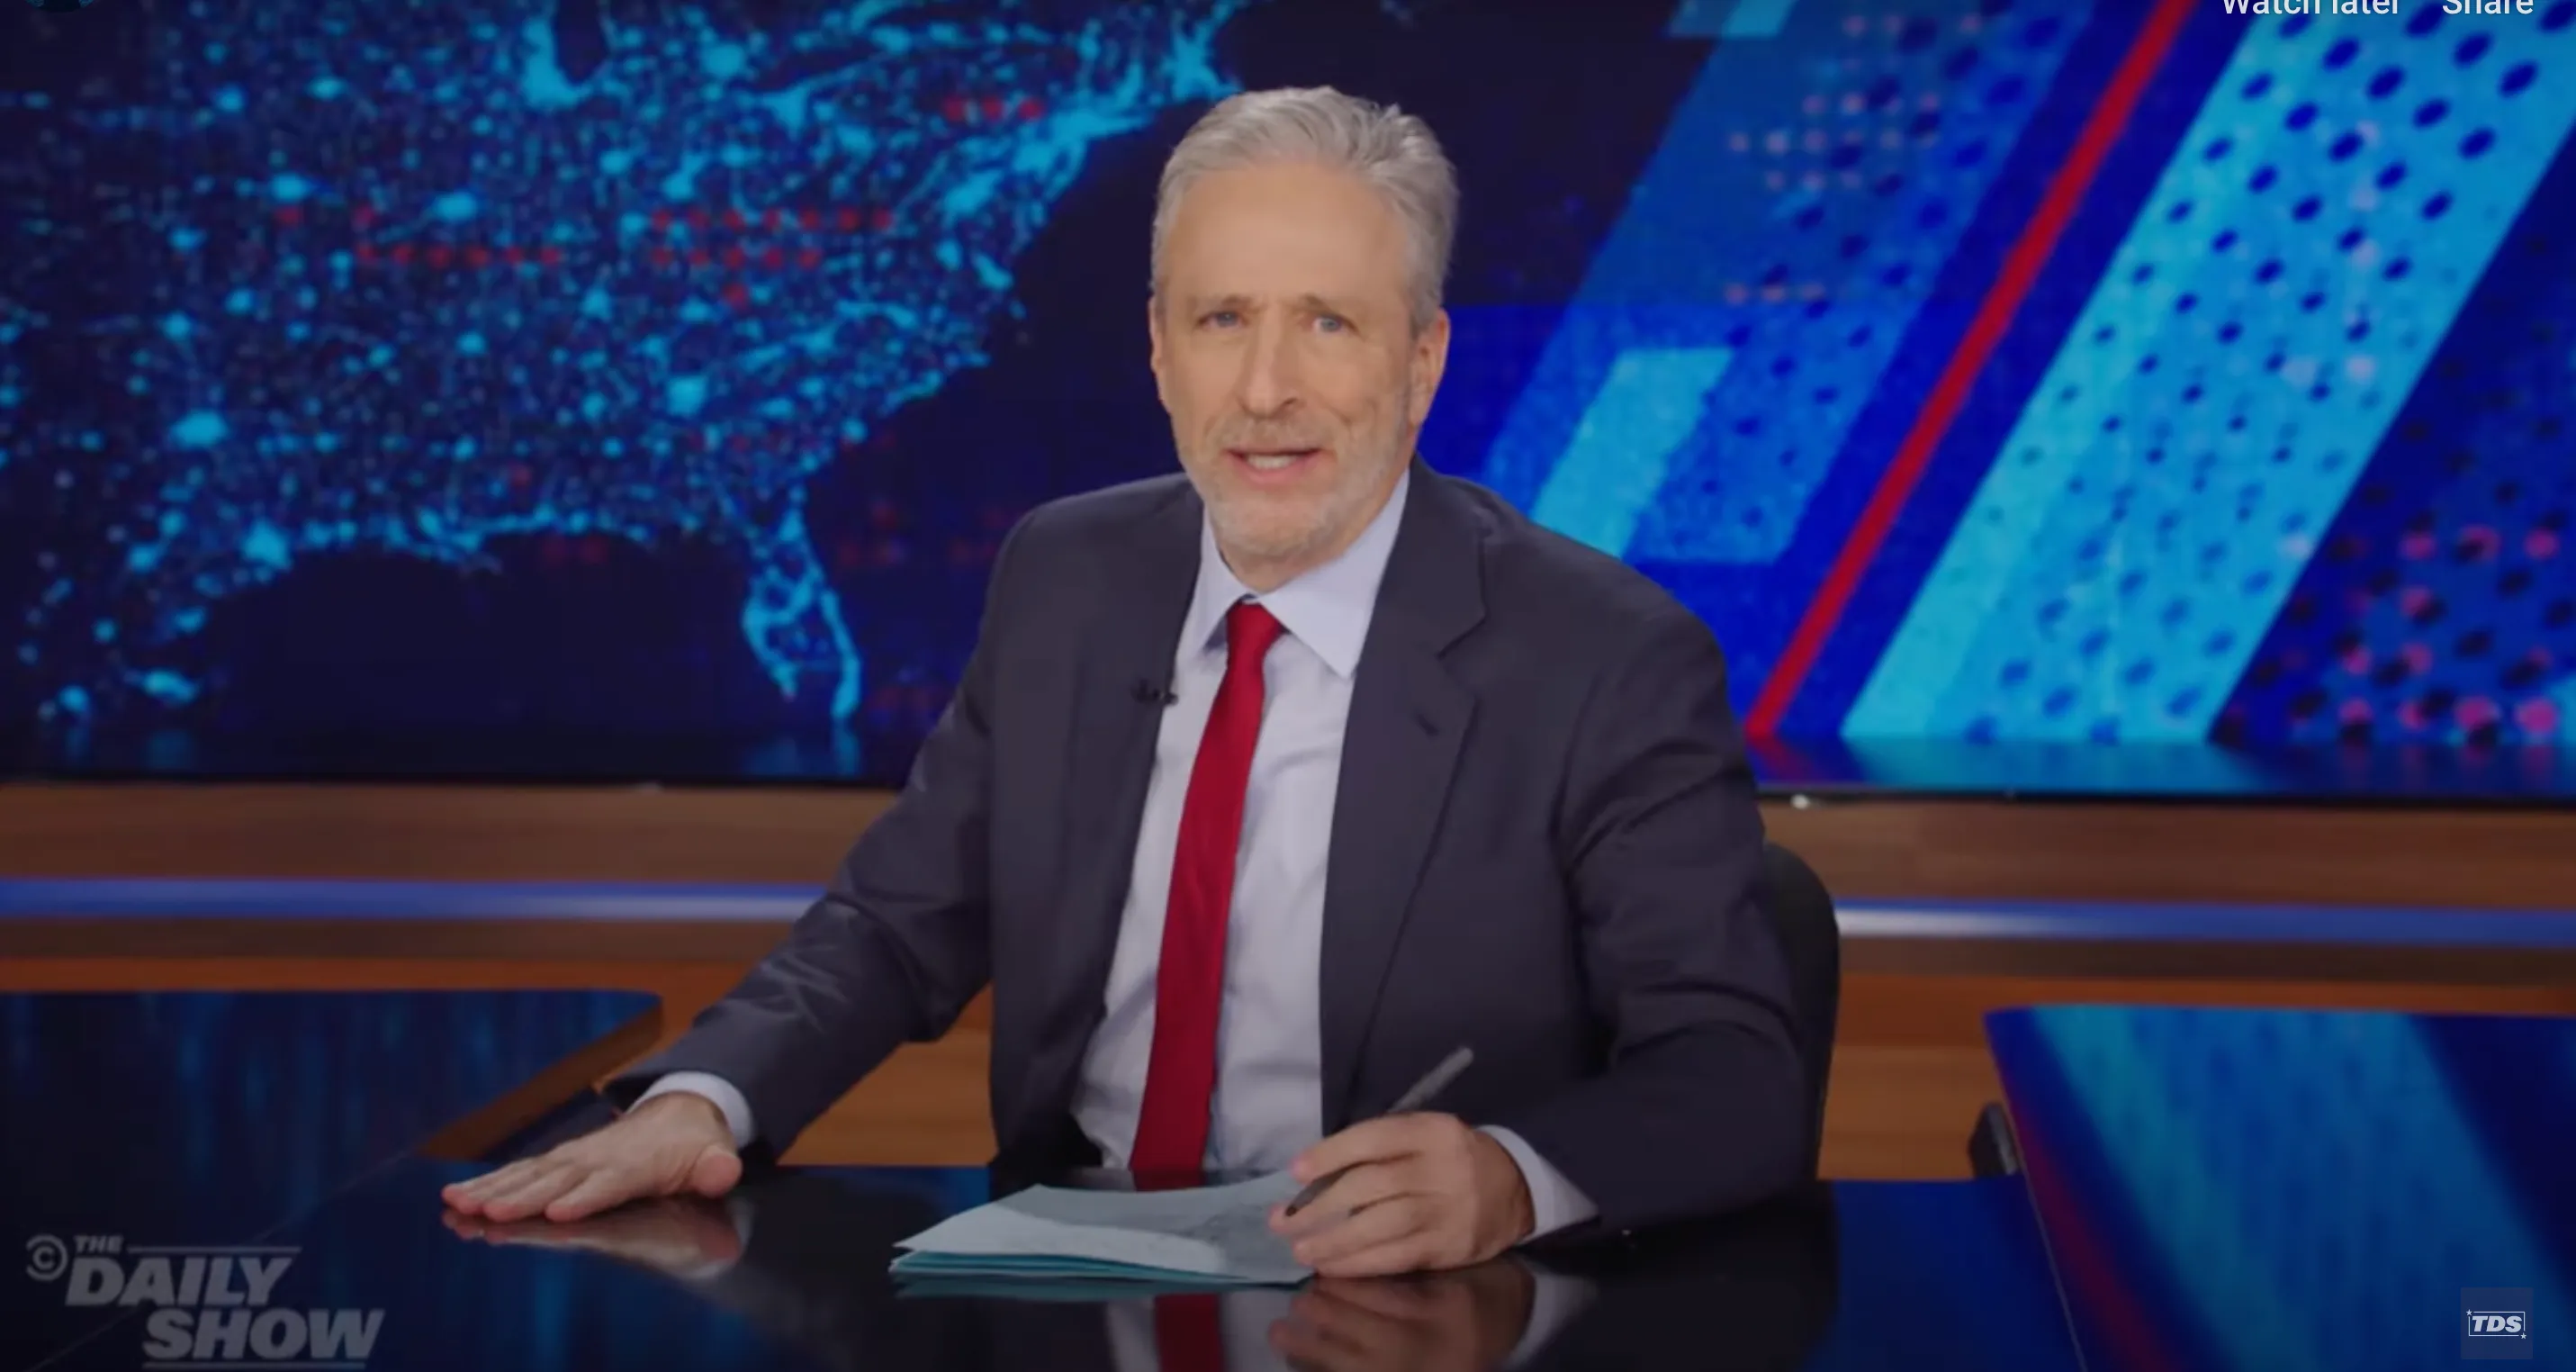 Jon Stewart Goes Absolutely Off On Trump AND Biden In Scathing ‘Daily Show’ Return (huffpost.com)